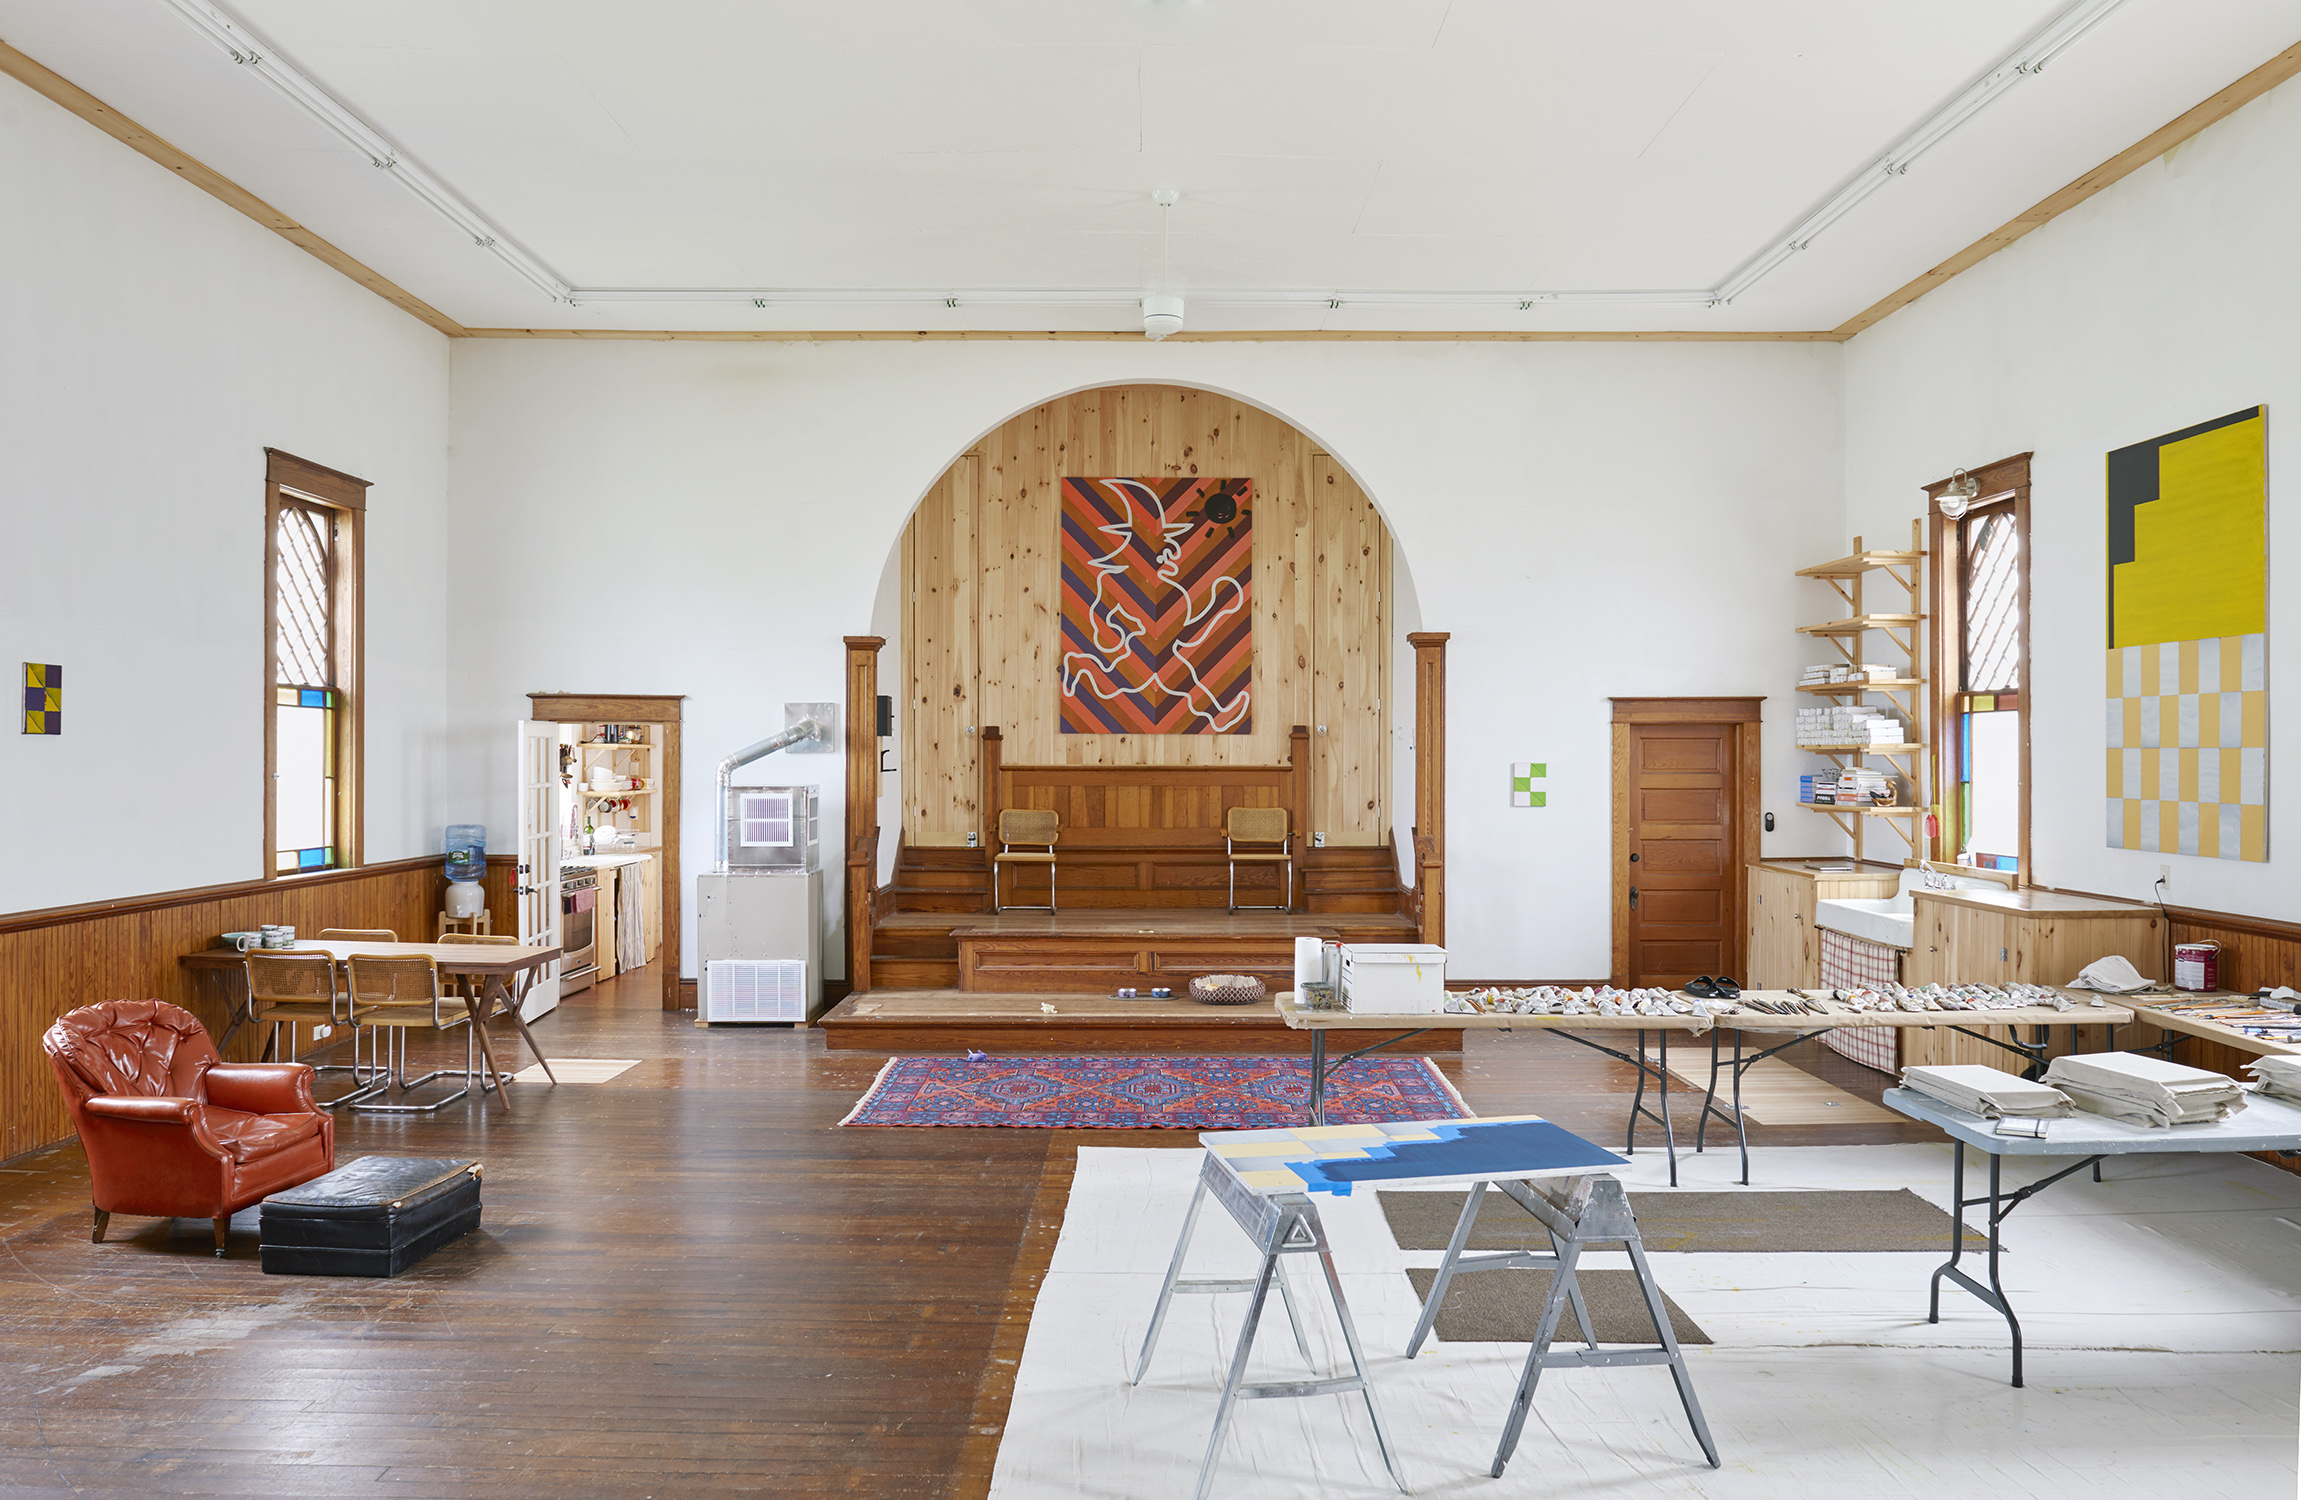 Joshua Abelow converted a church in upstate New York into his home, studio and gallery.